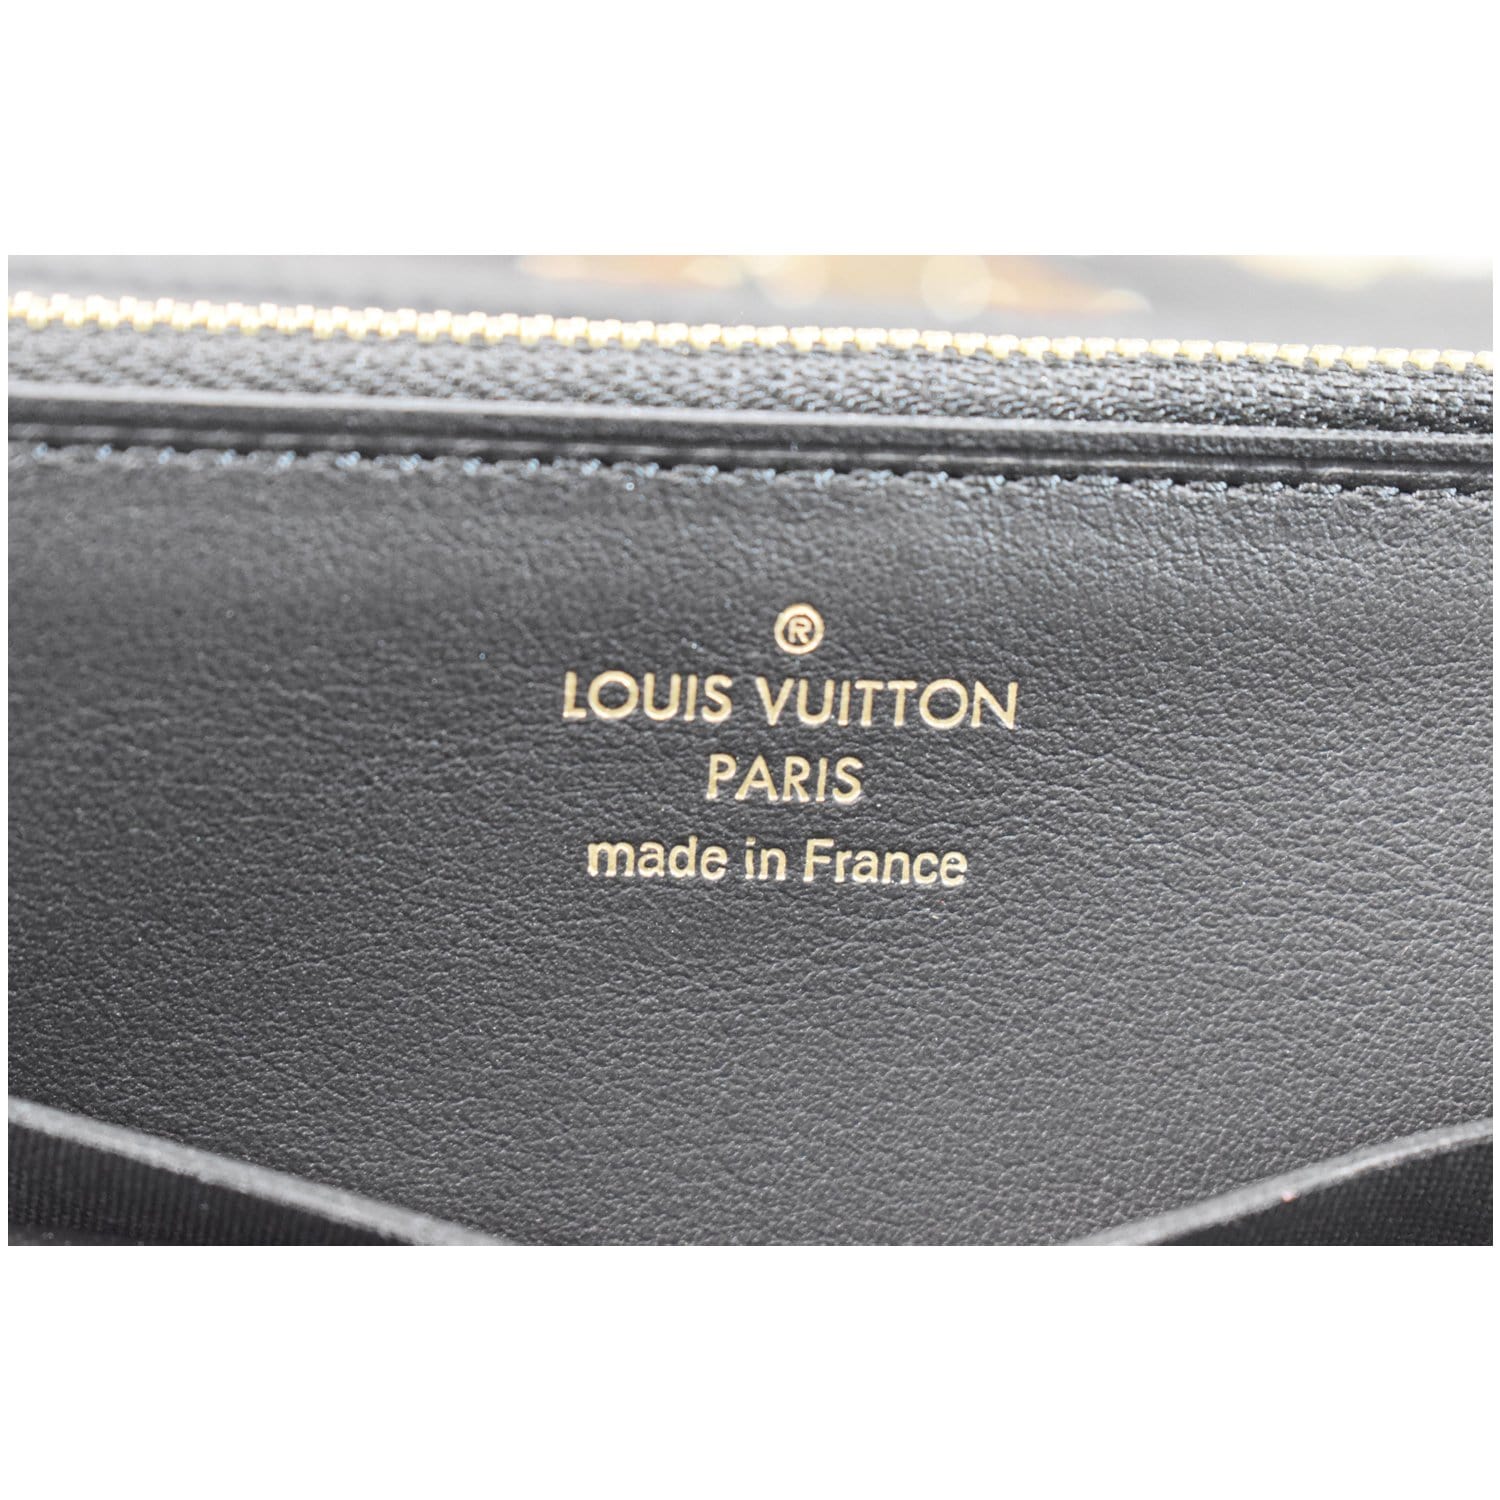 LOUIS VUITTON Taurillon Embellished Flower Crown Capucines PM